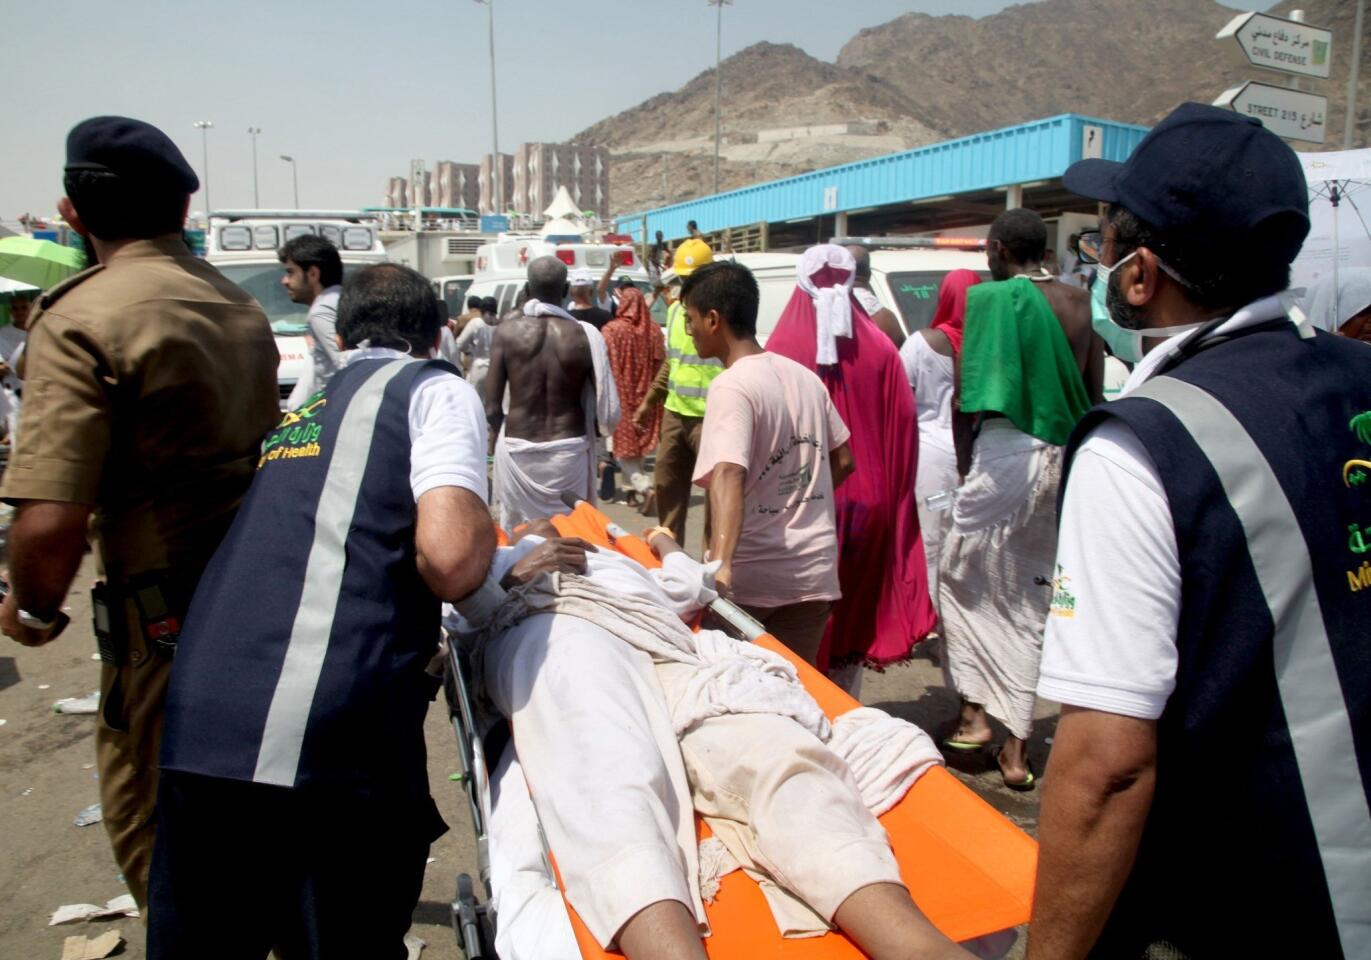 Saudi emergency personnel transport a hajj pilgim on a stretcher at the site of a stampede in Mina.